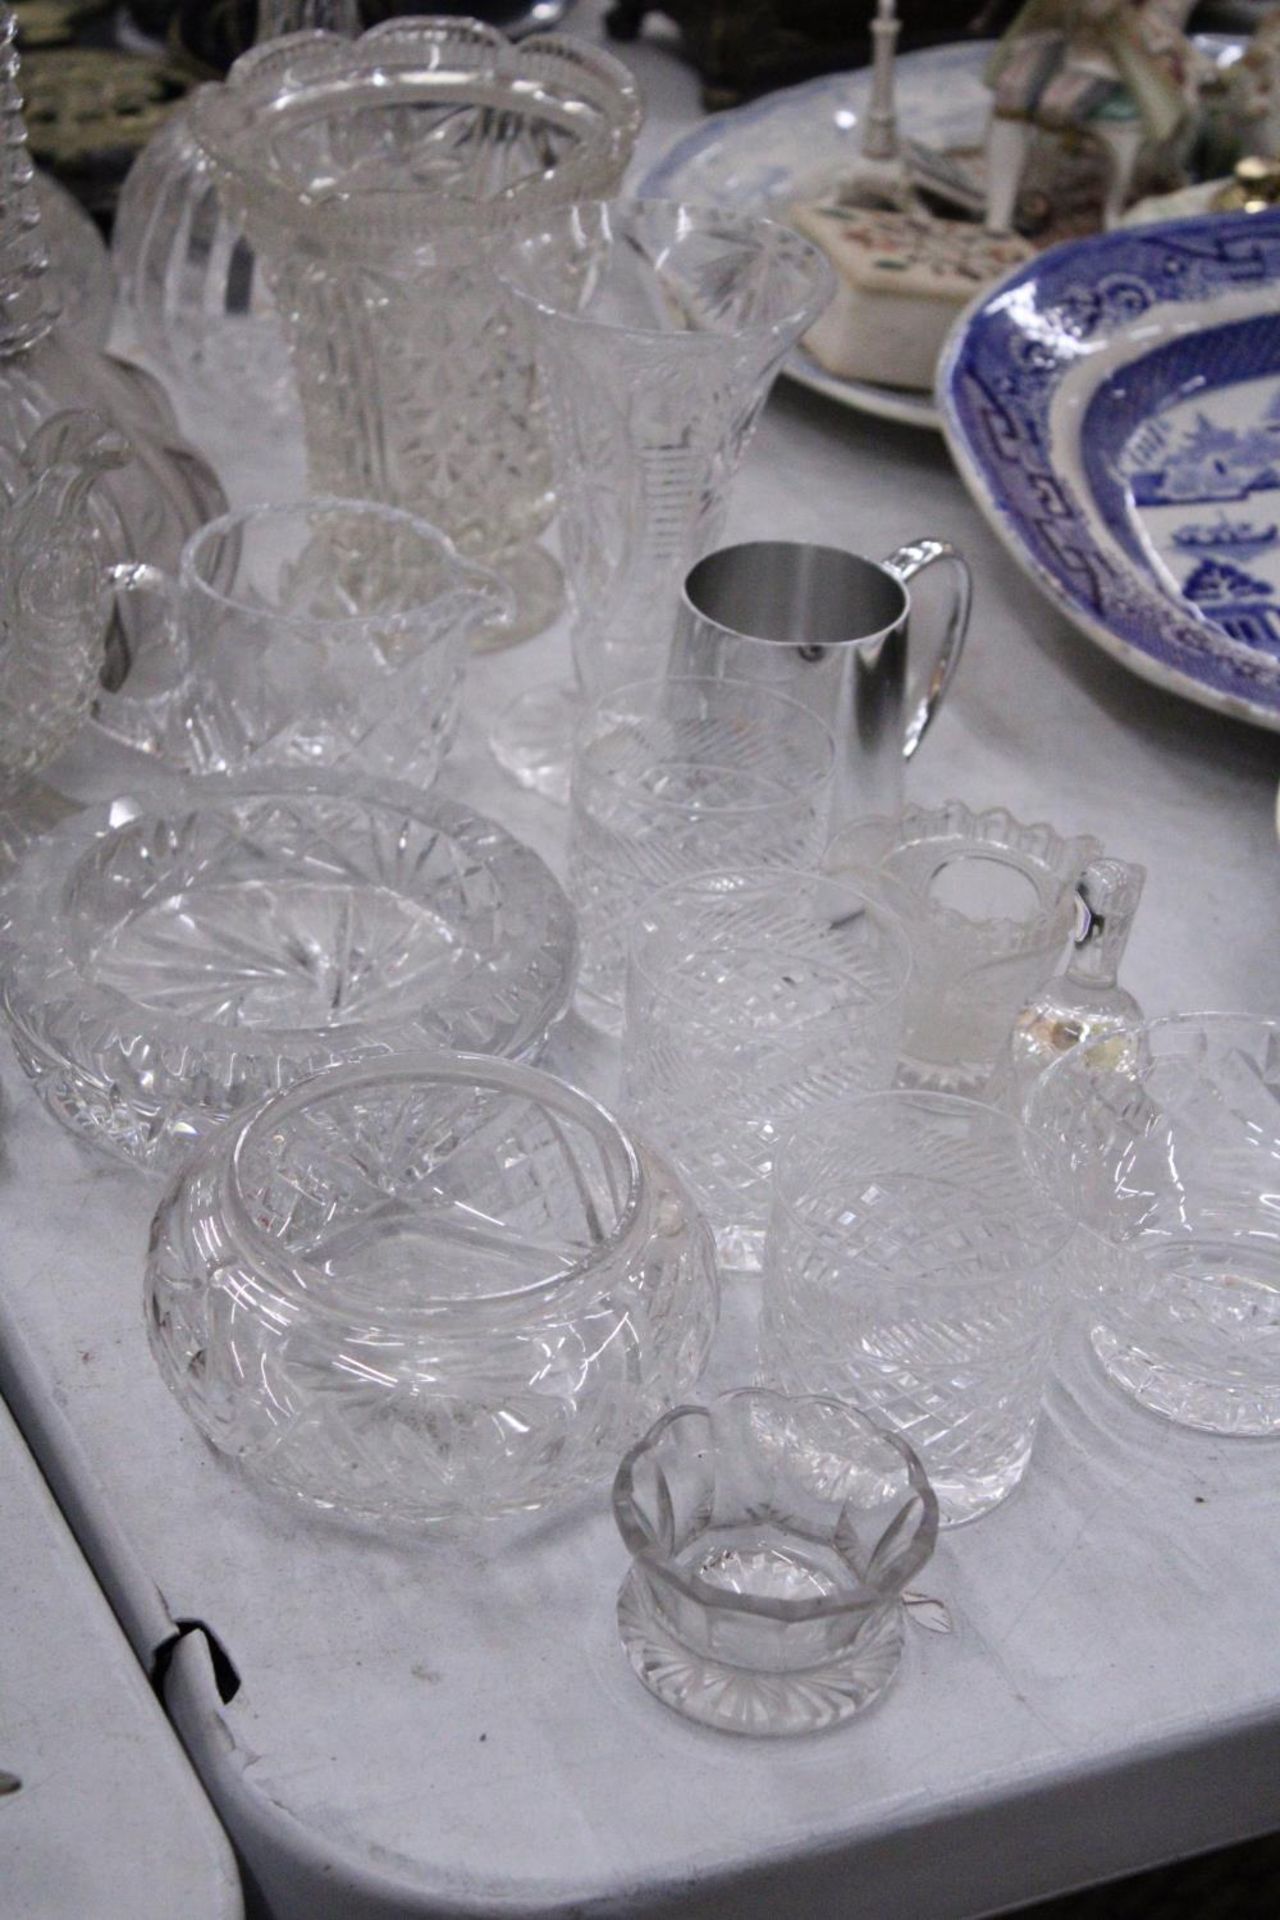 A QUANTITY OF GLASSWARE TO INCLUDE DECANTERS, VASES, JUGS, BOWLS, ETC - Image 5 of 6